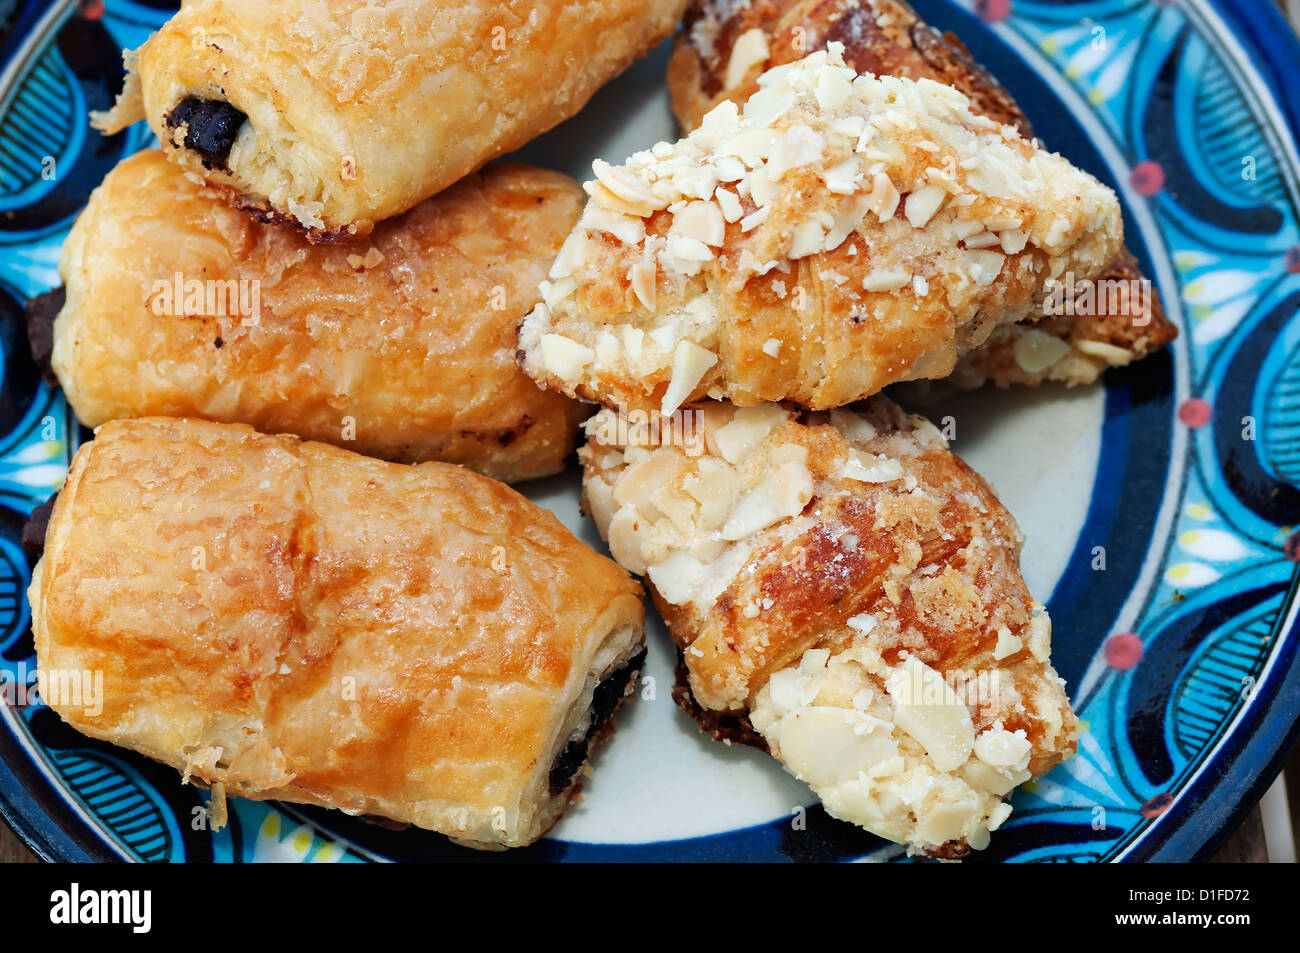 A plate is filled with an assortment of miniature chocolate and almond croissants. Stock Photo